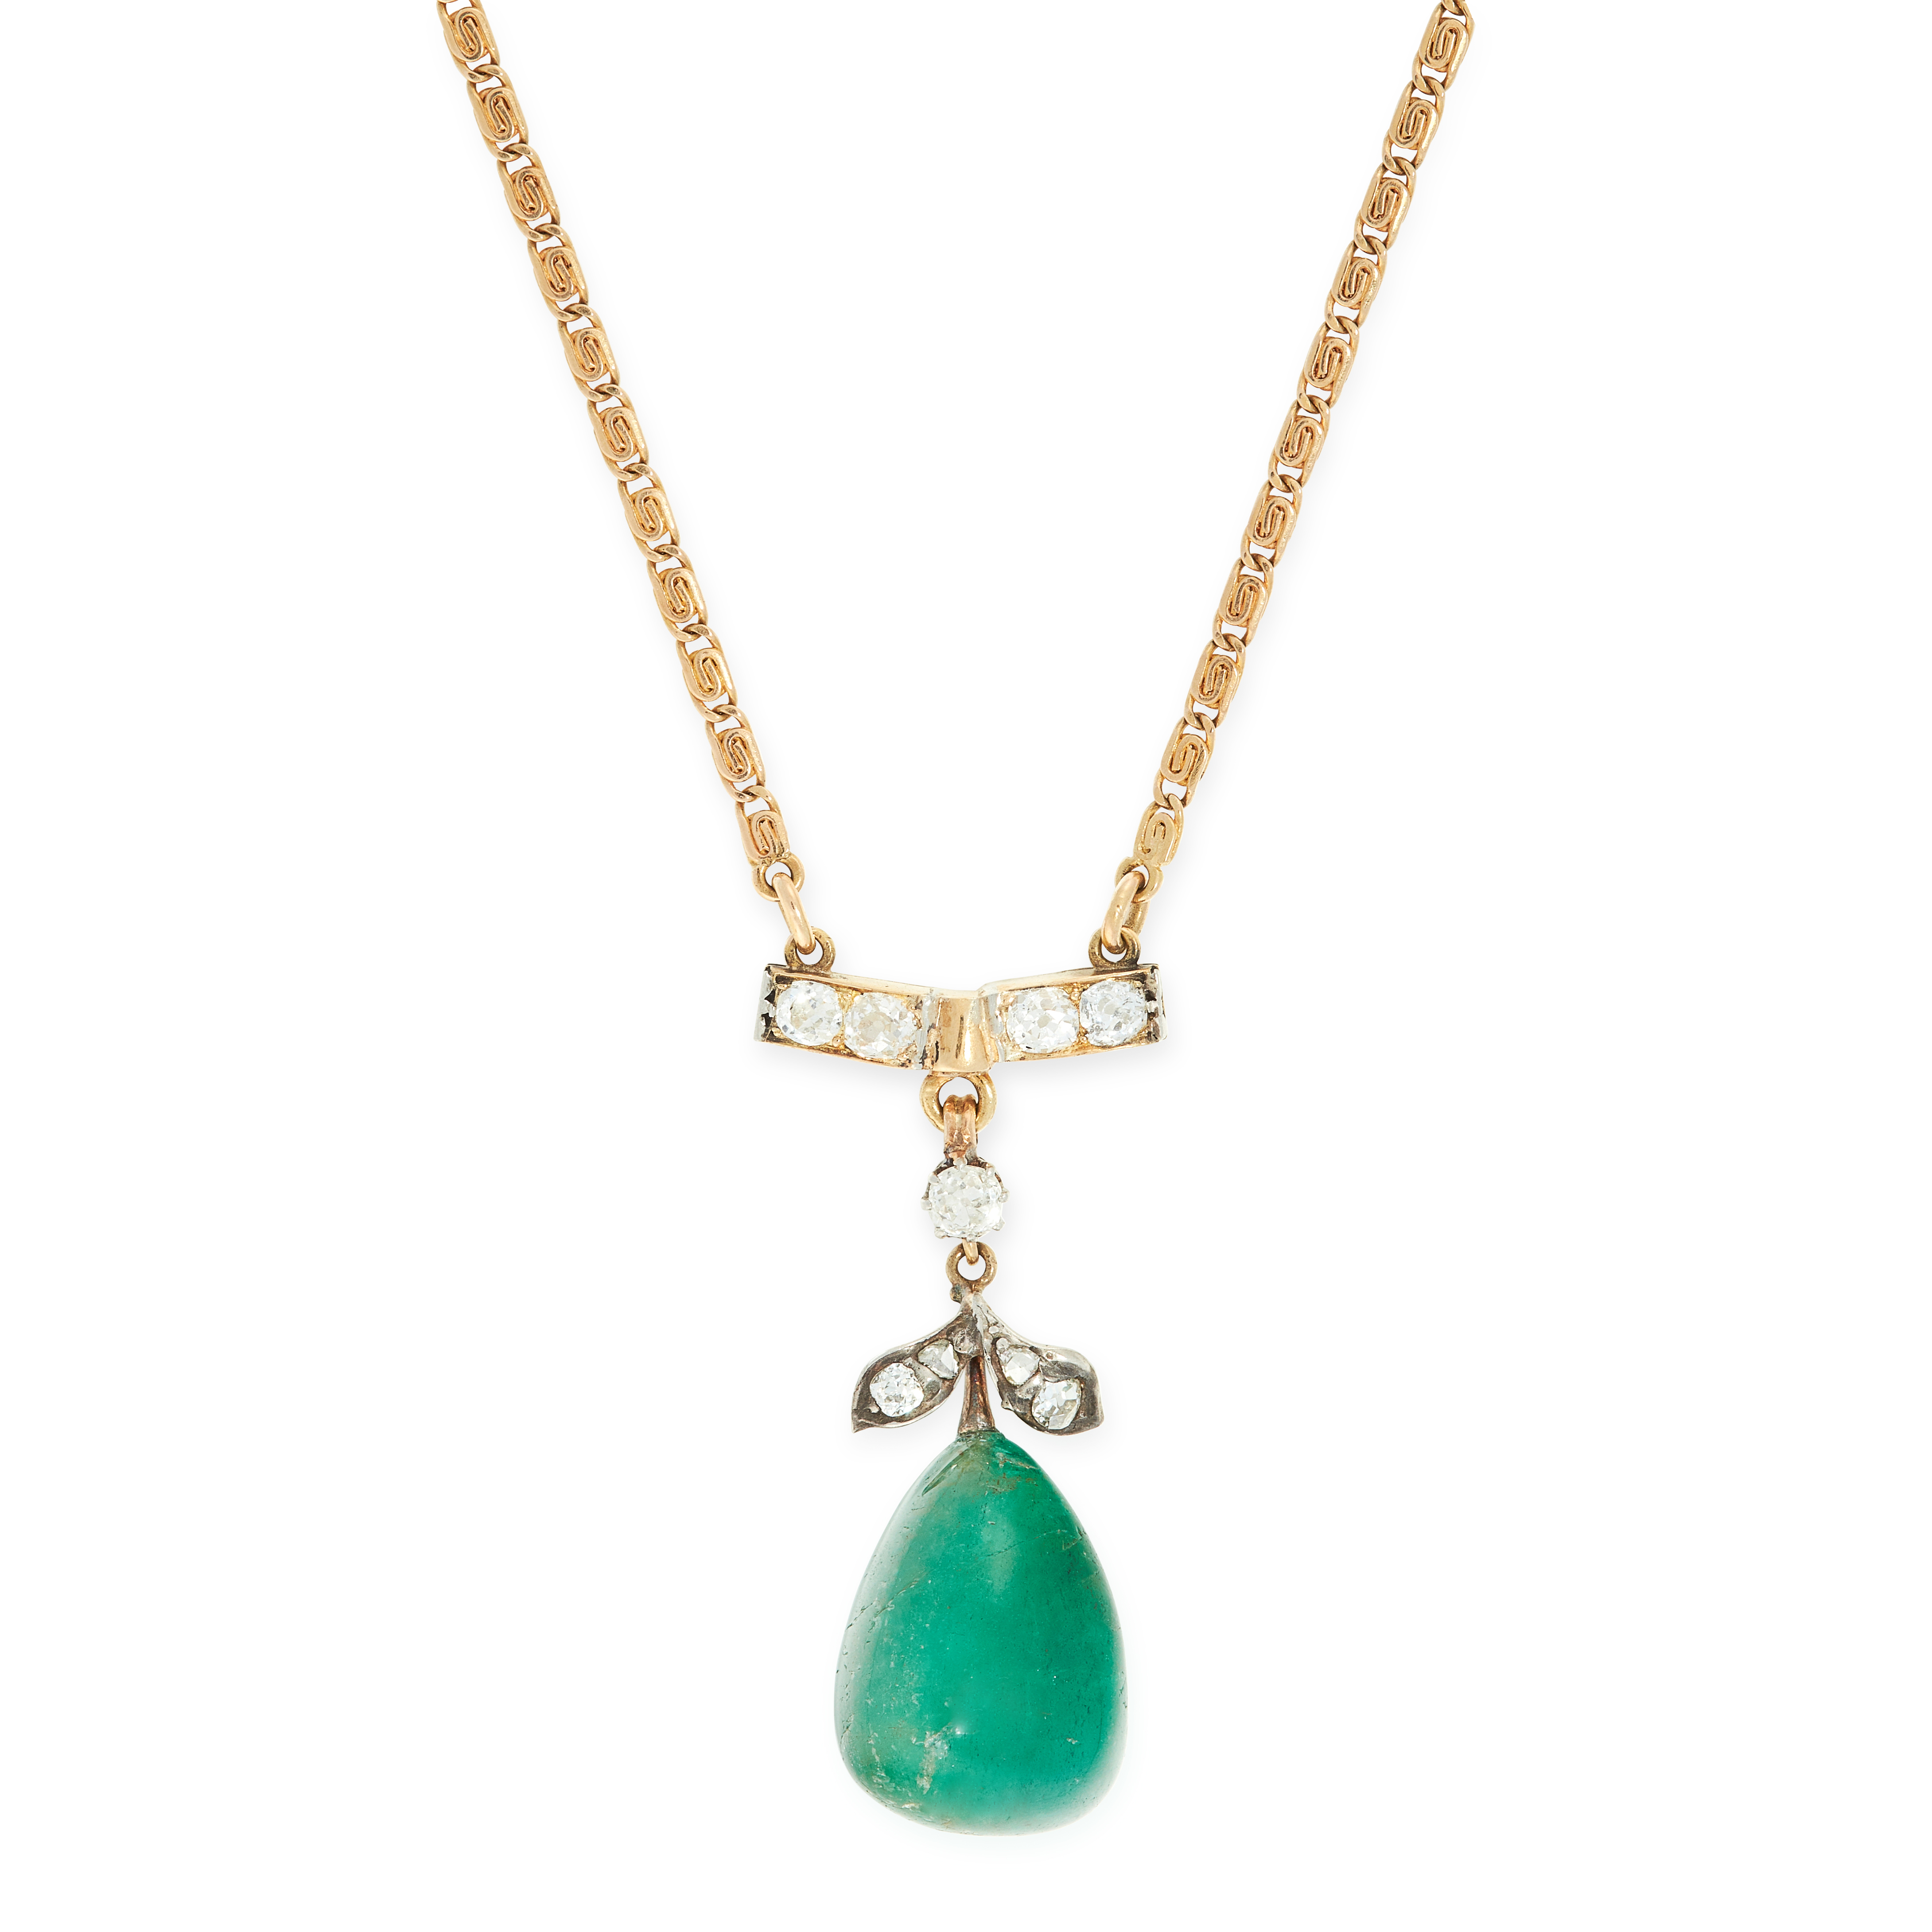 AN EMERALD AND DIAMOND PENDANT NECKLACE in 18ct yellow gold and silver, set with a large drop shaped